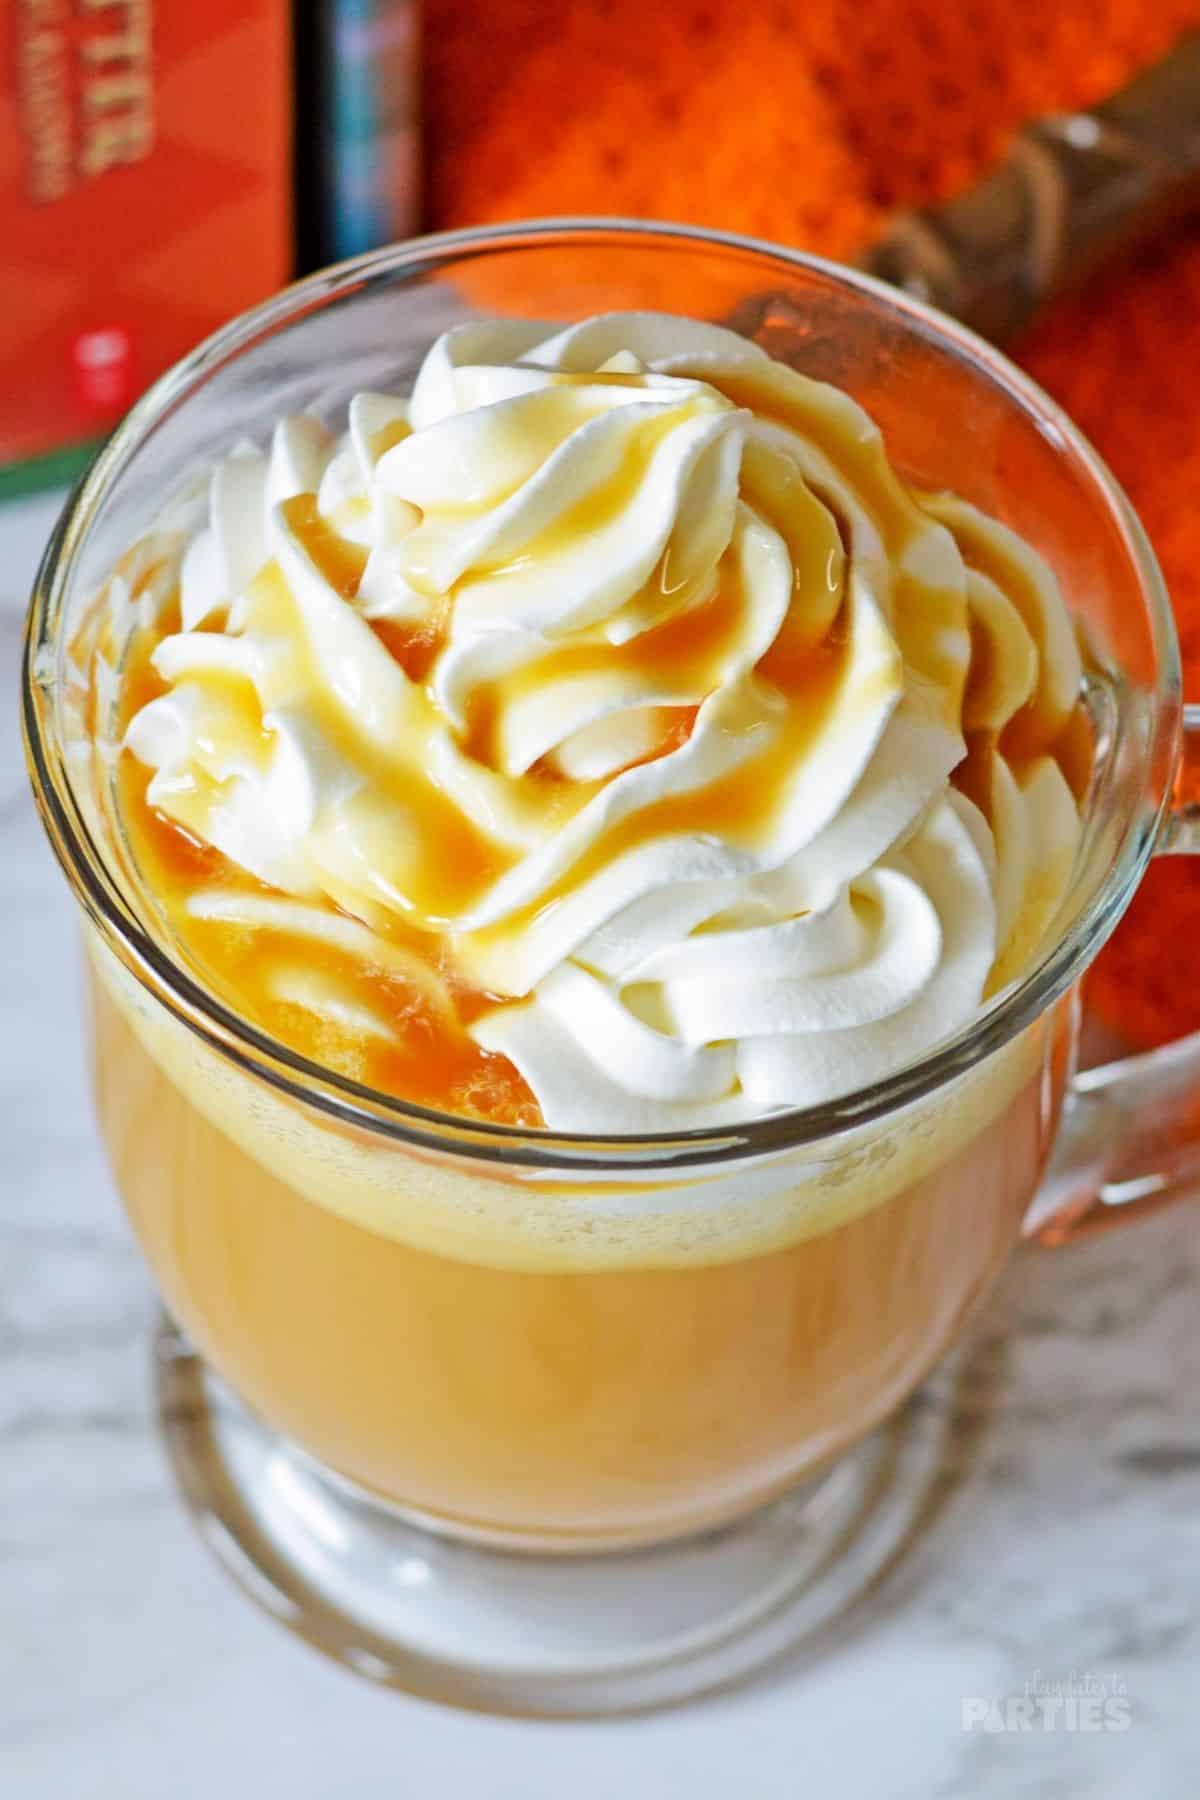 Looking down at a mug filled with a cream soda, topped with whipped cream and butterscotch.